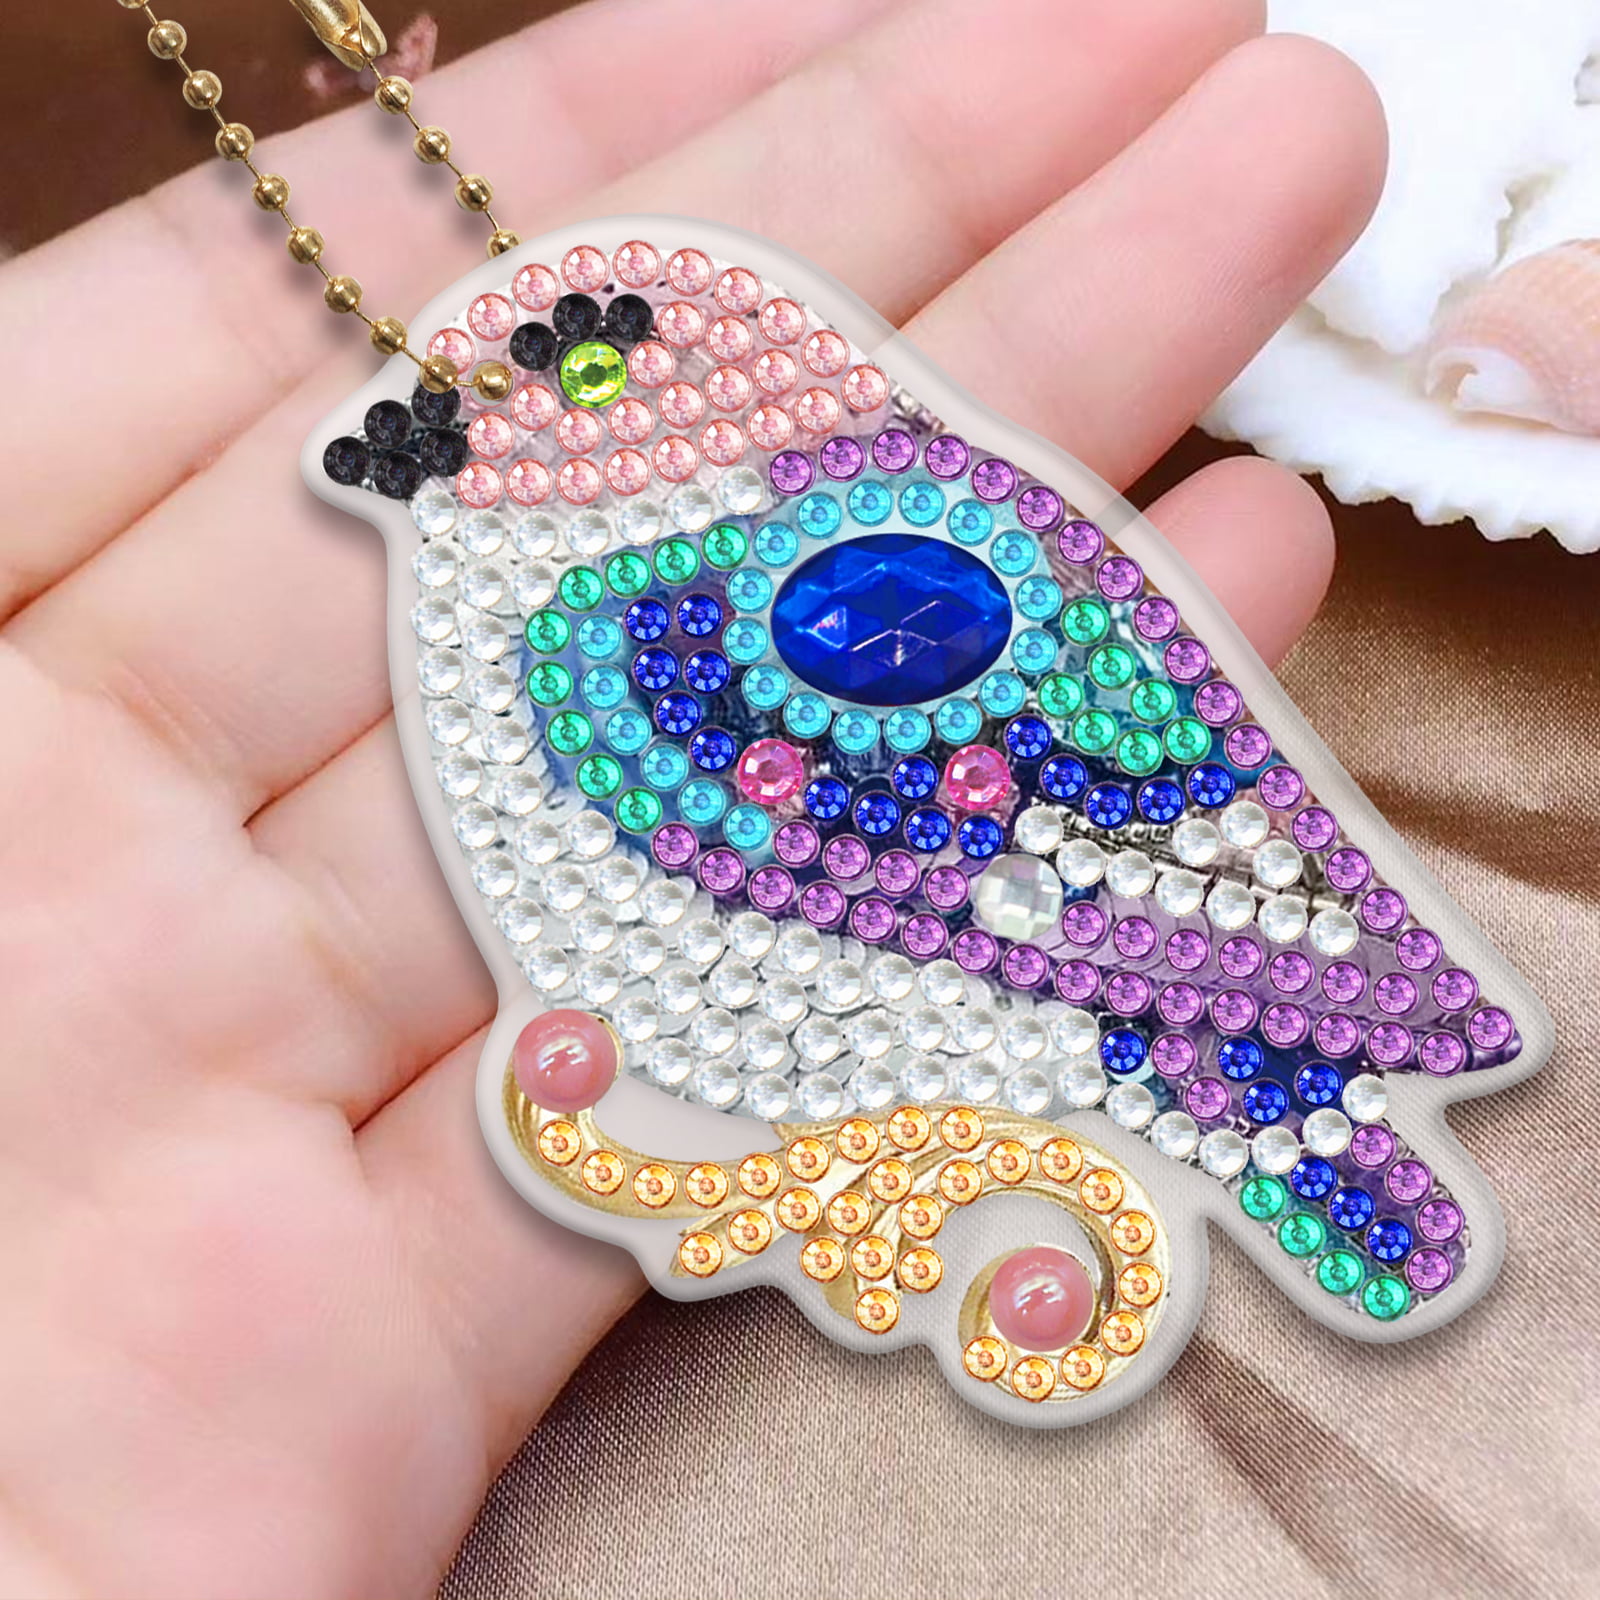 YALKIN Diamond Painting Keychain, 5D DIY Diamond Painting Kits for Kids  Adult, Special Shaped Full Drill Double-Side Diamond Key Ring Set Diamond  Pendant Kits for Backpack Shoulder Bag Accessories 